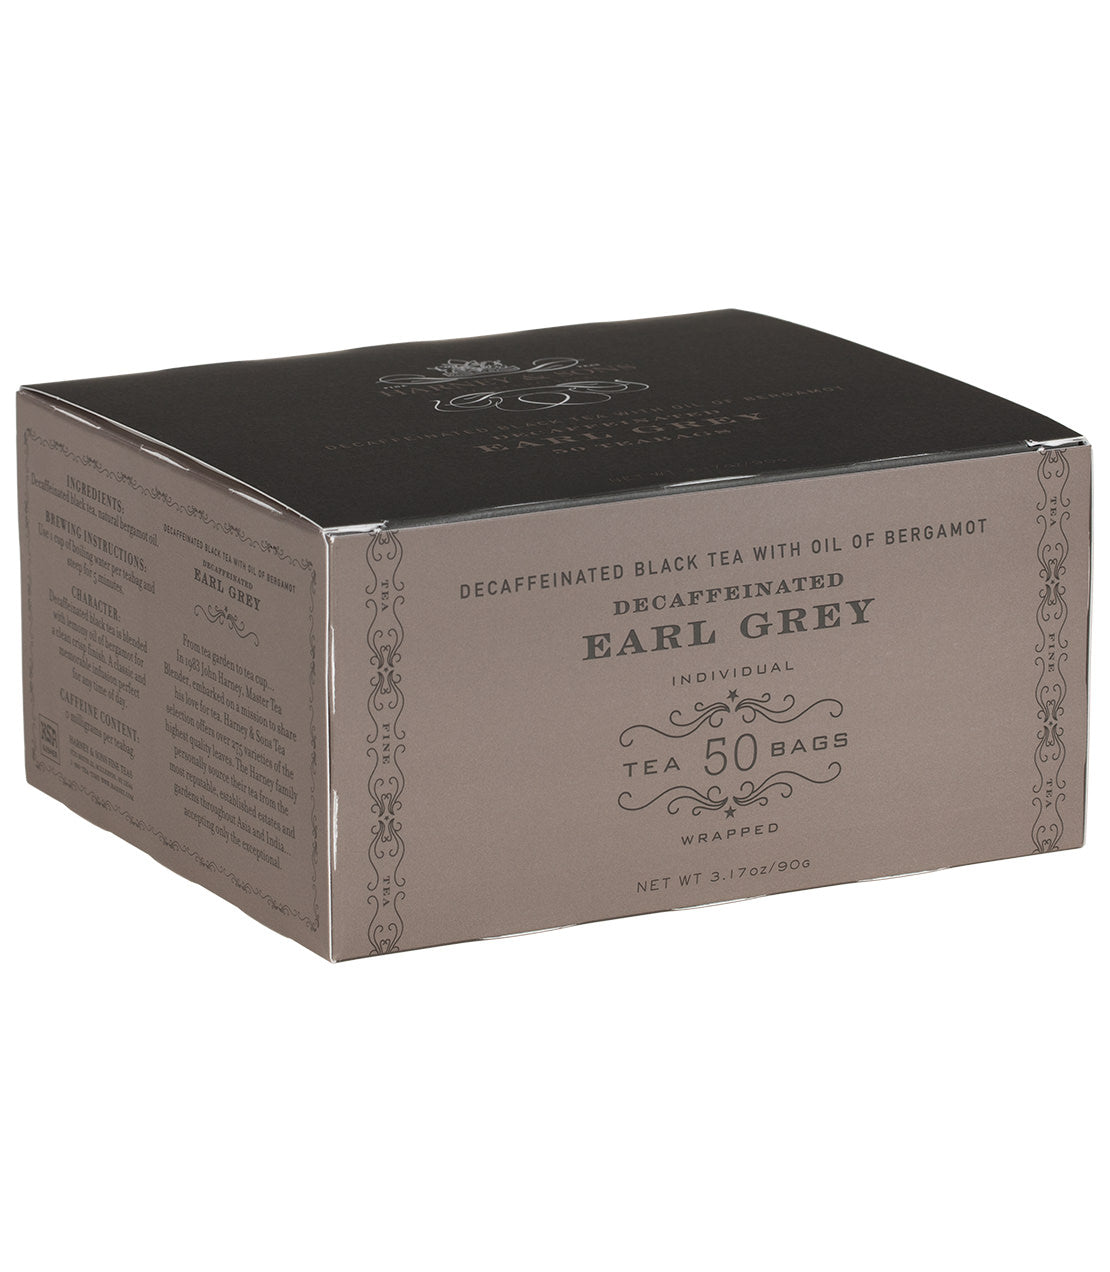 Decaf Earl Grey - Teabags 50 CT Foil Wrapped Teabags - Harney & Sons Fine Teas